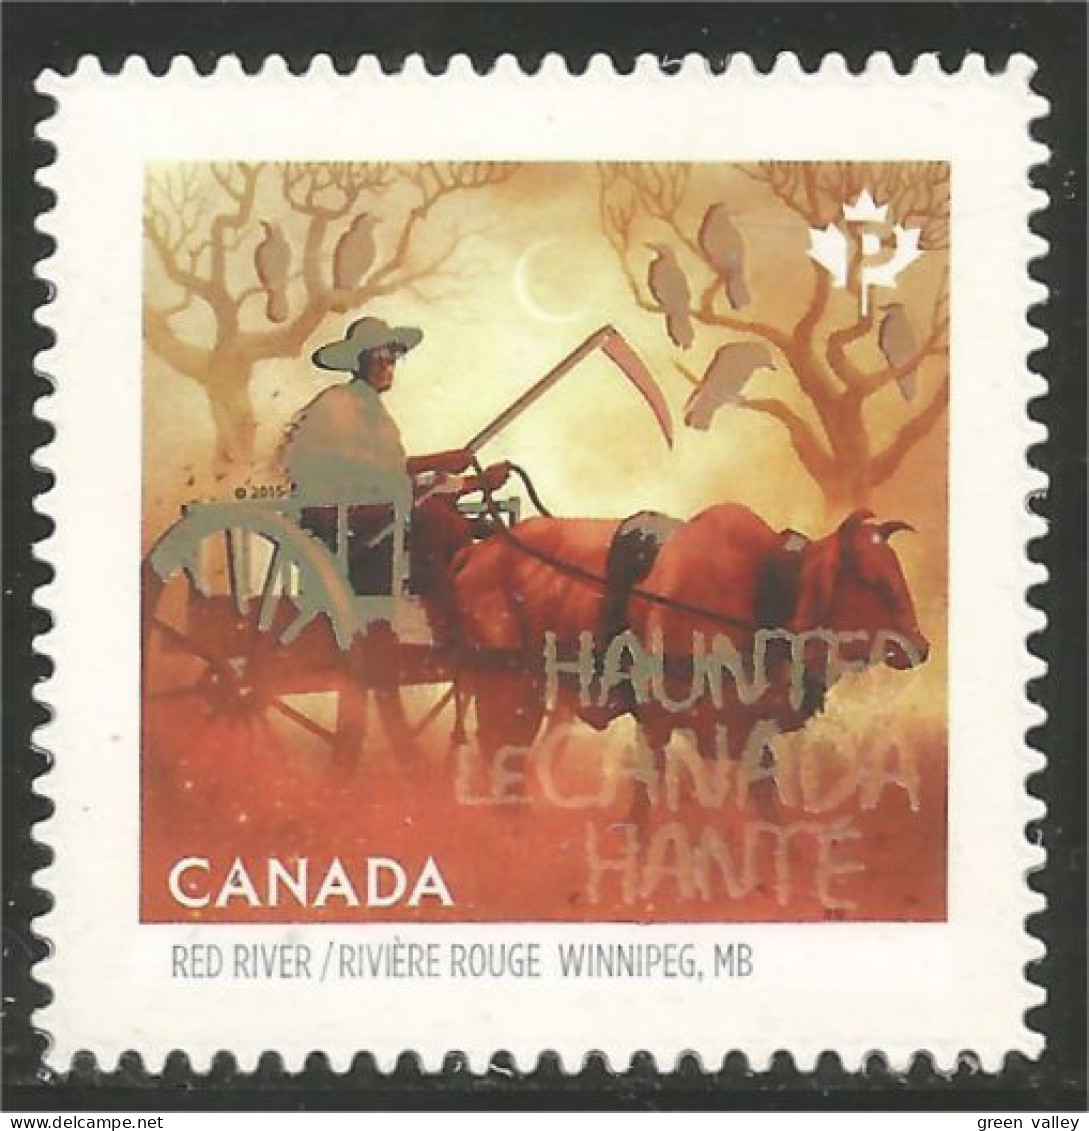 Canada Trail Oxcart Chariot Boeuf Annual Collection Annuelle MNH ** Neuf SC (C28-64ia) - Ongebruikt